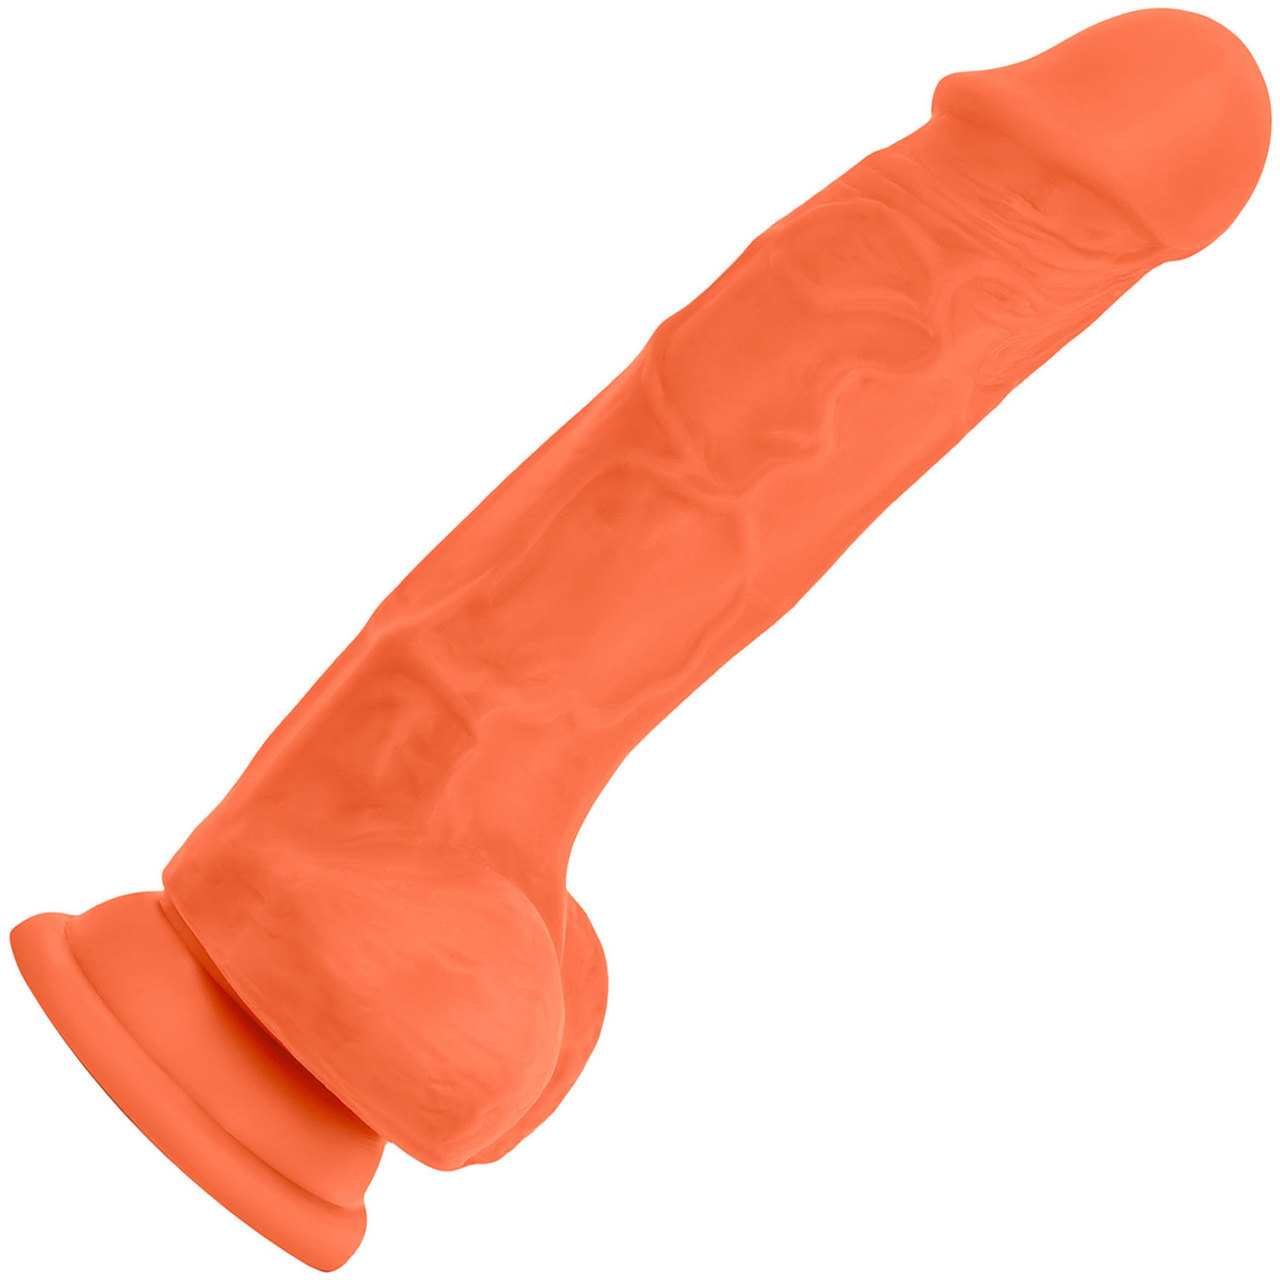 Neo Elite 7.5 Inch Silicone Dual Density Cock with Balls